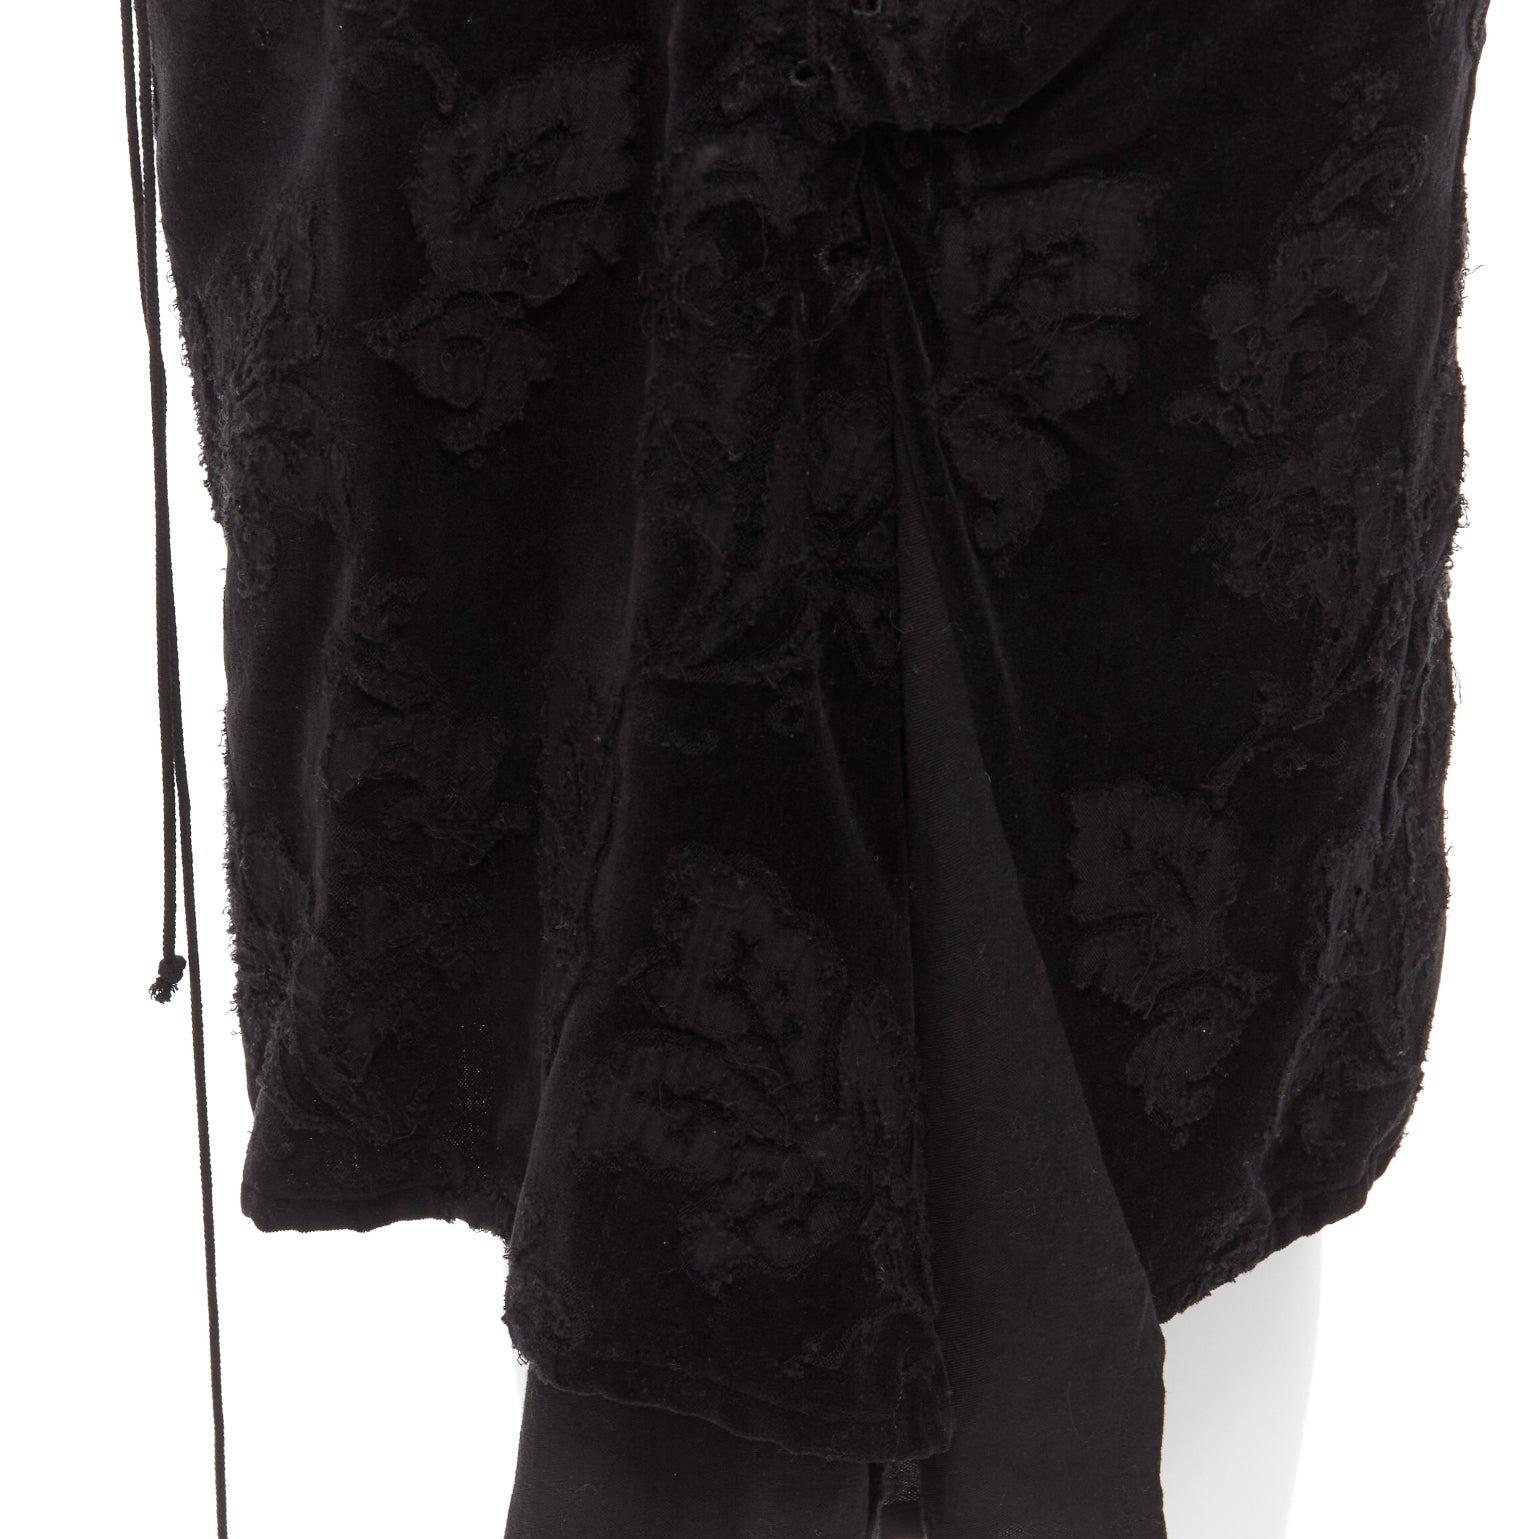 YOHJI YAMAMOTO NOIR black cotton velvet floral jacquard lace up skirt JP1 S
Reference: JACG/A00113
Brand: Yohji Yamamoto
Collection: Noir
Material: Cotton
Color: Black
Pattern: Floral
Closure: Lace Up
Lining: Black Fabric
Extra Details: Lace up and